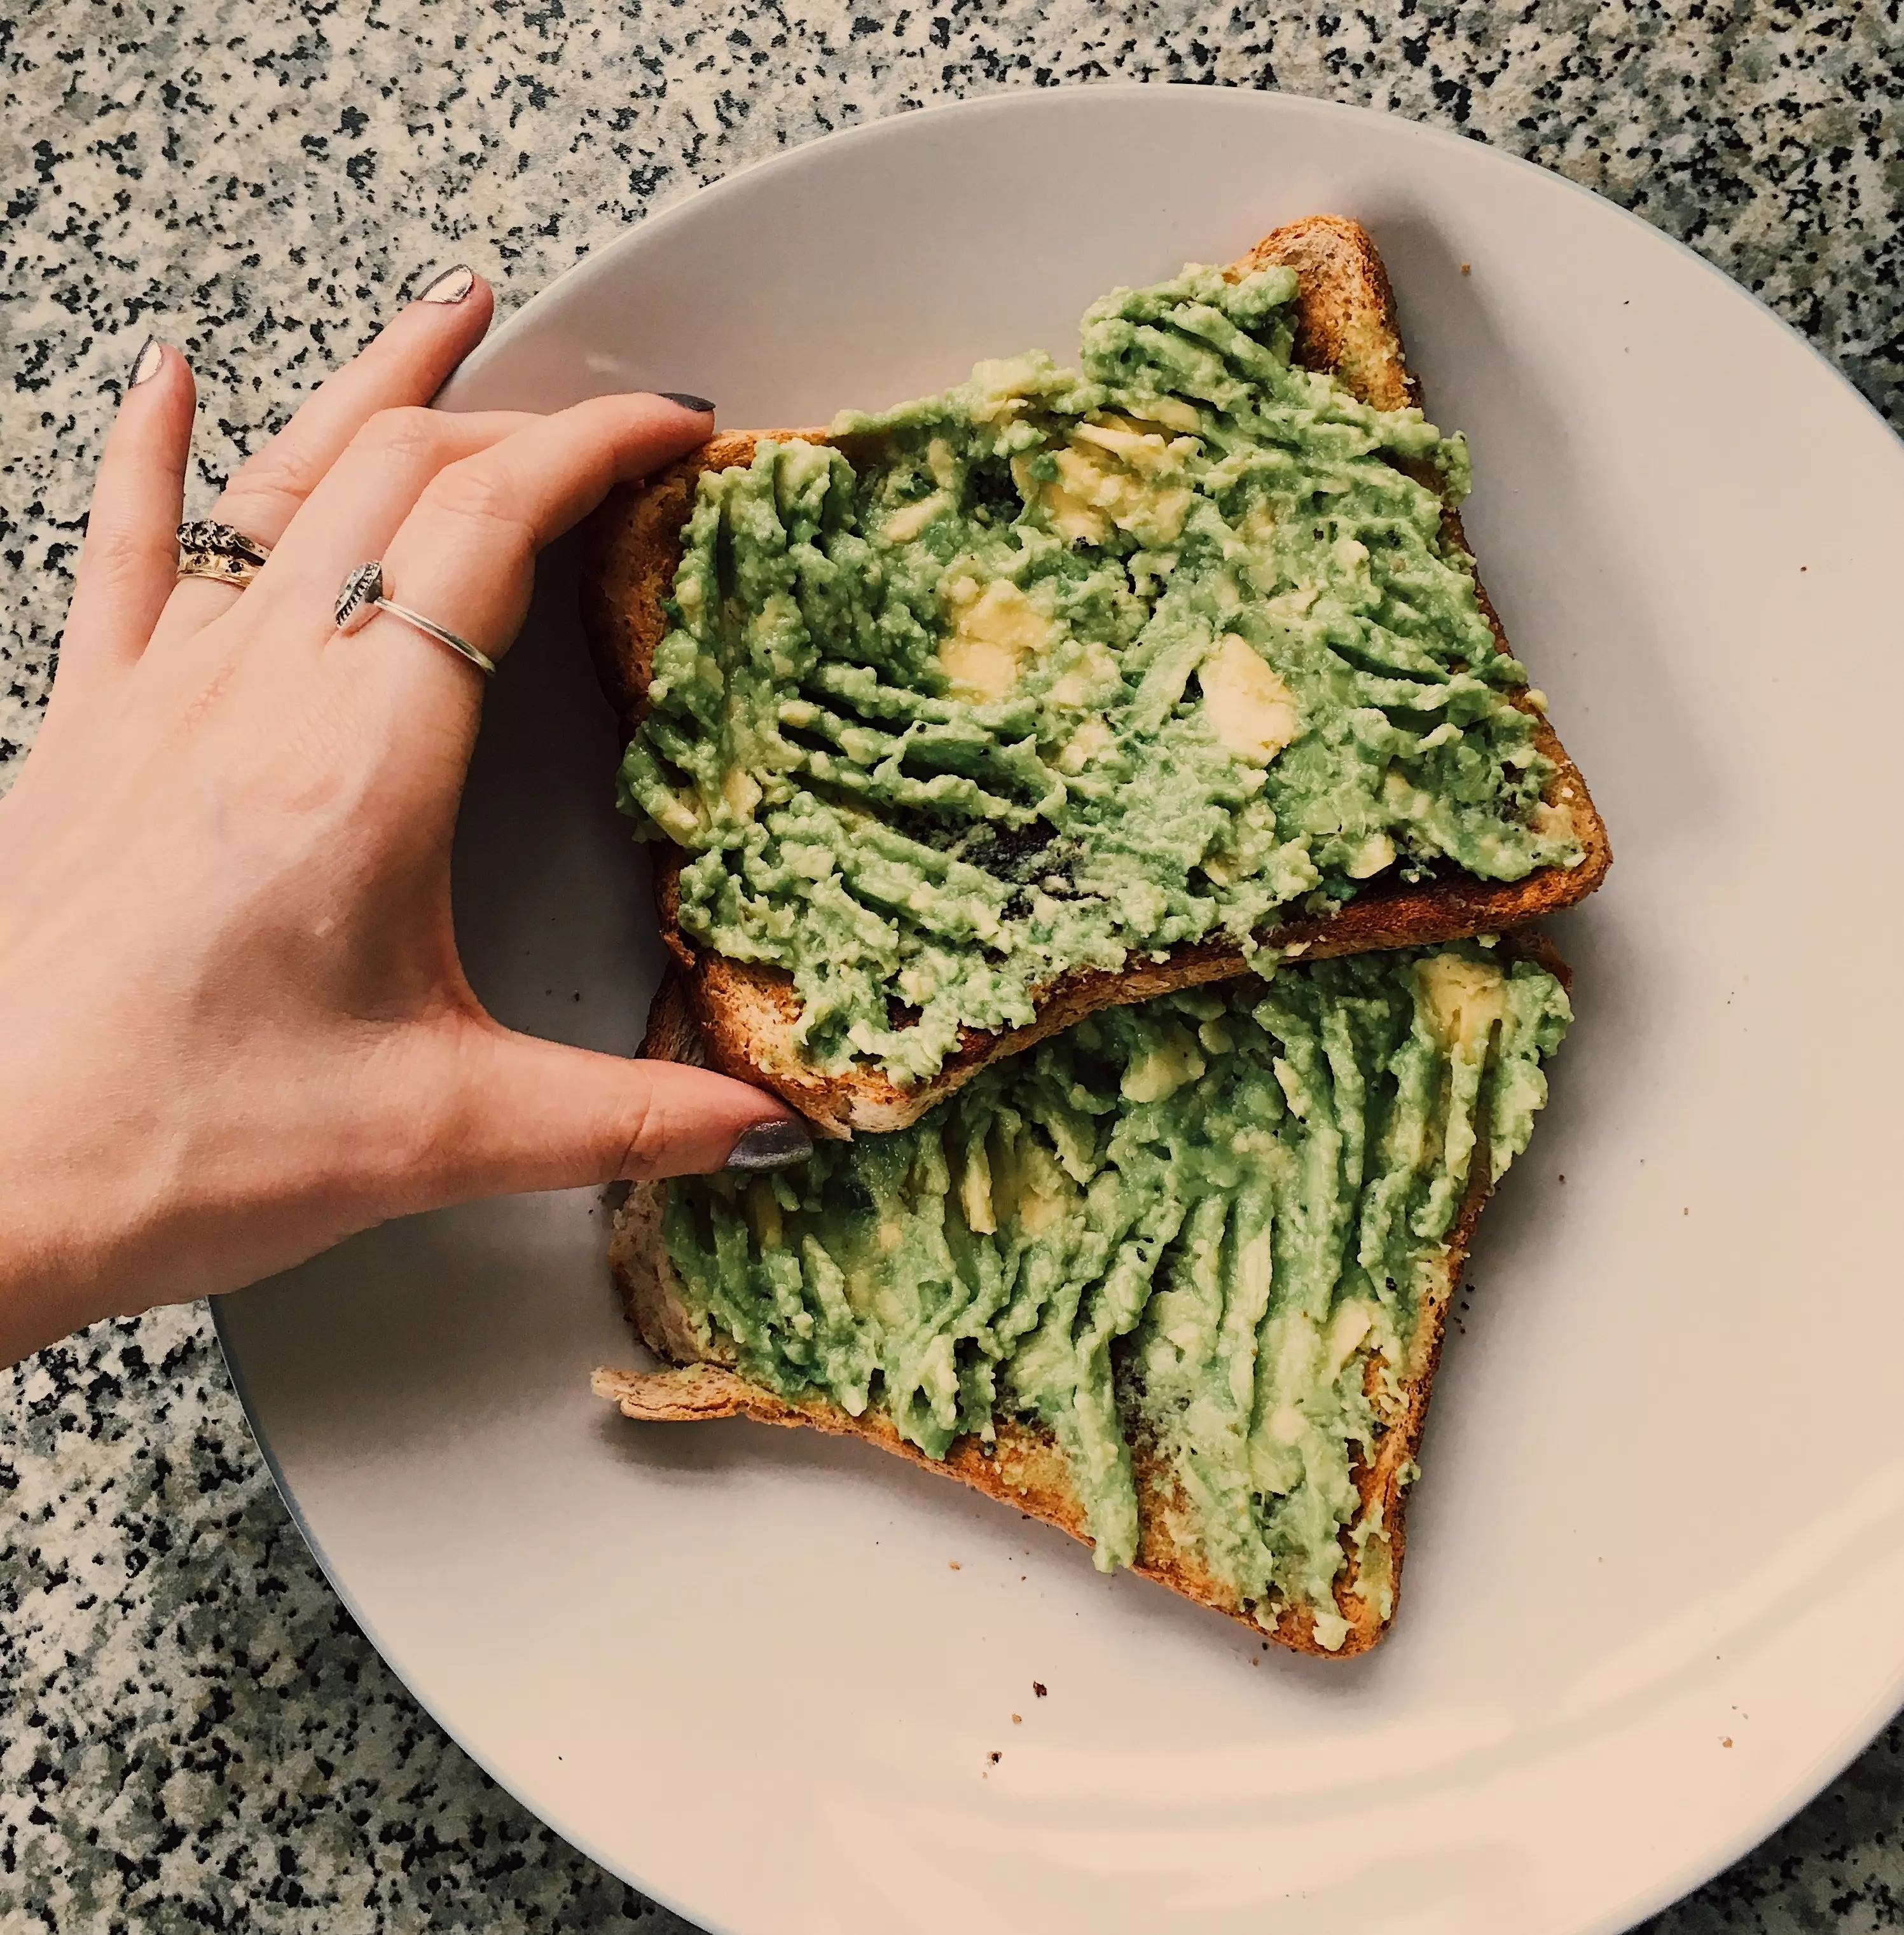 The hack means we can have avocado on toast two weekends on the trot with just one avocado and it won't spoil (